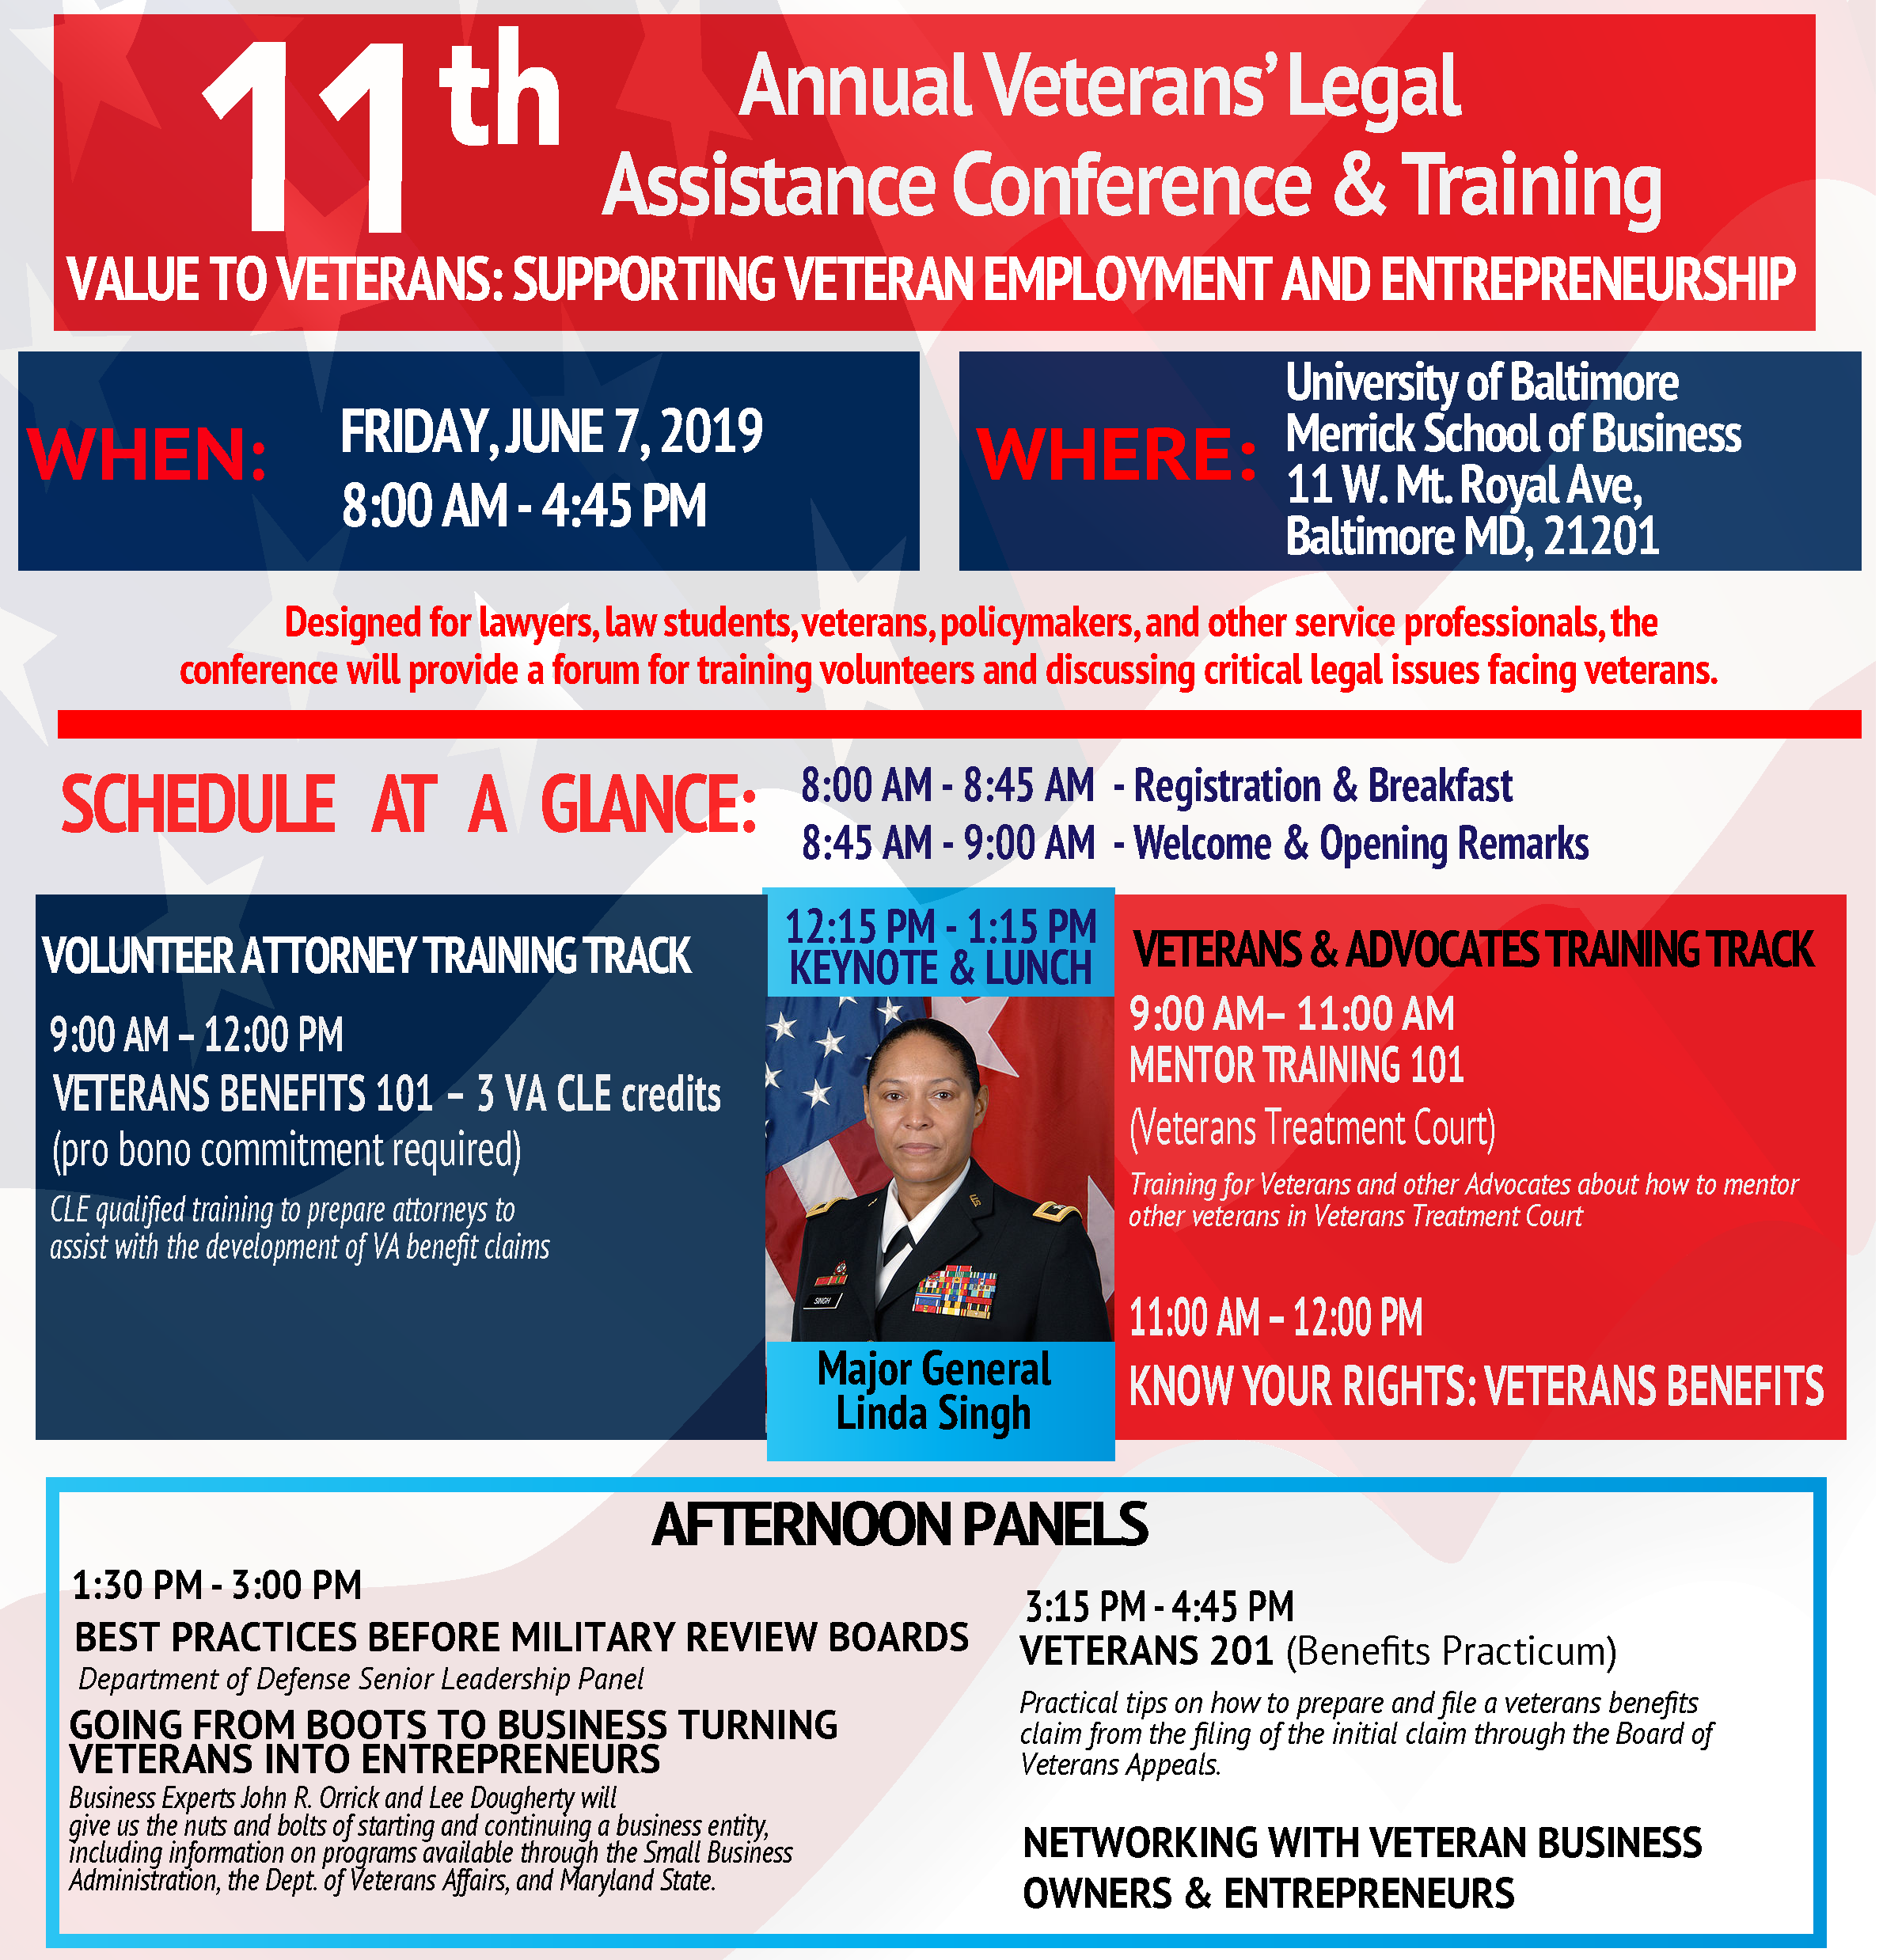 Veterans Legal Assistance Conference And Training Pro